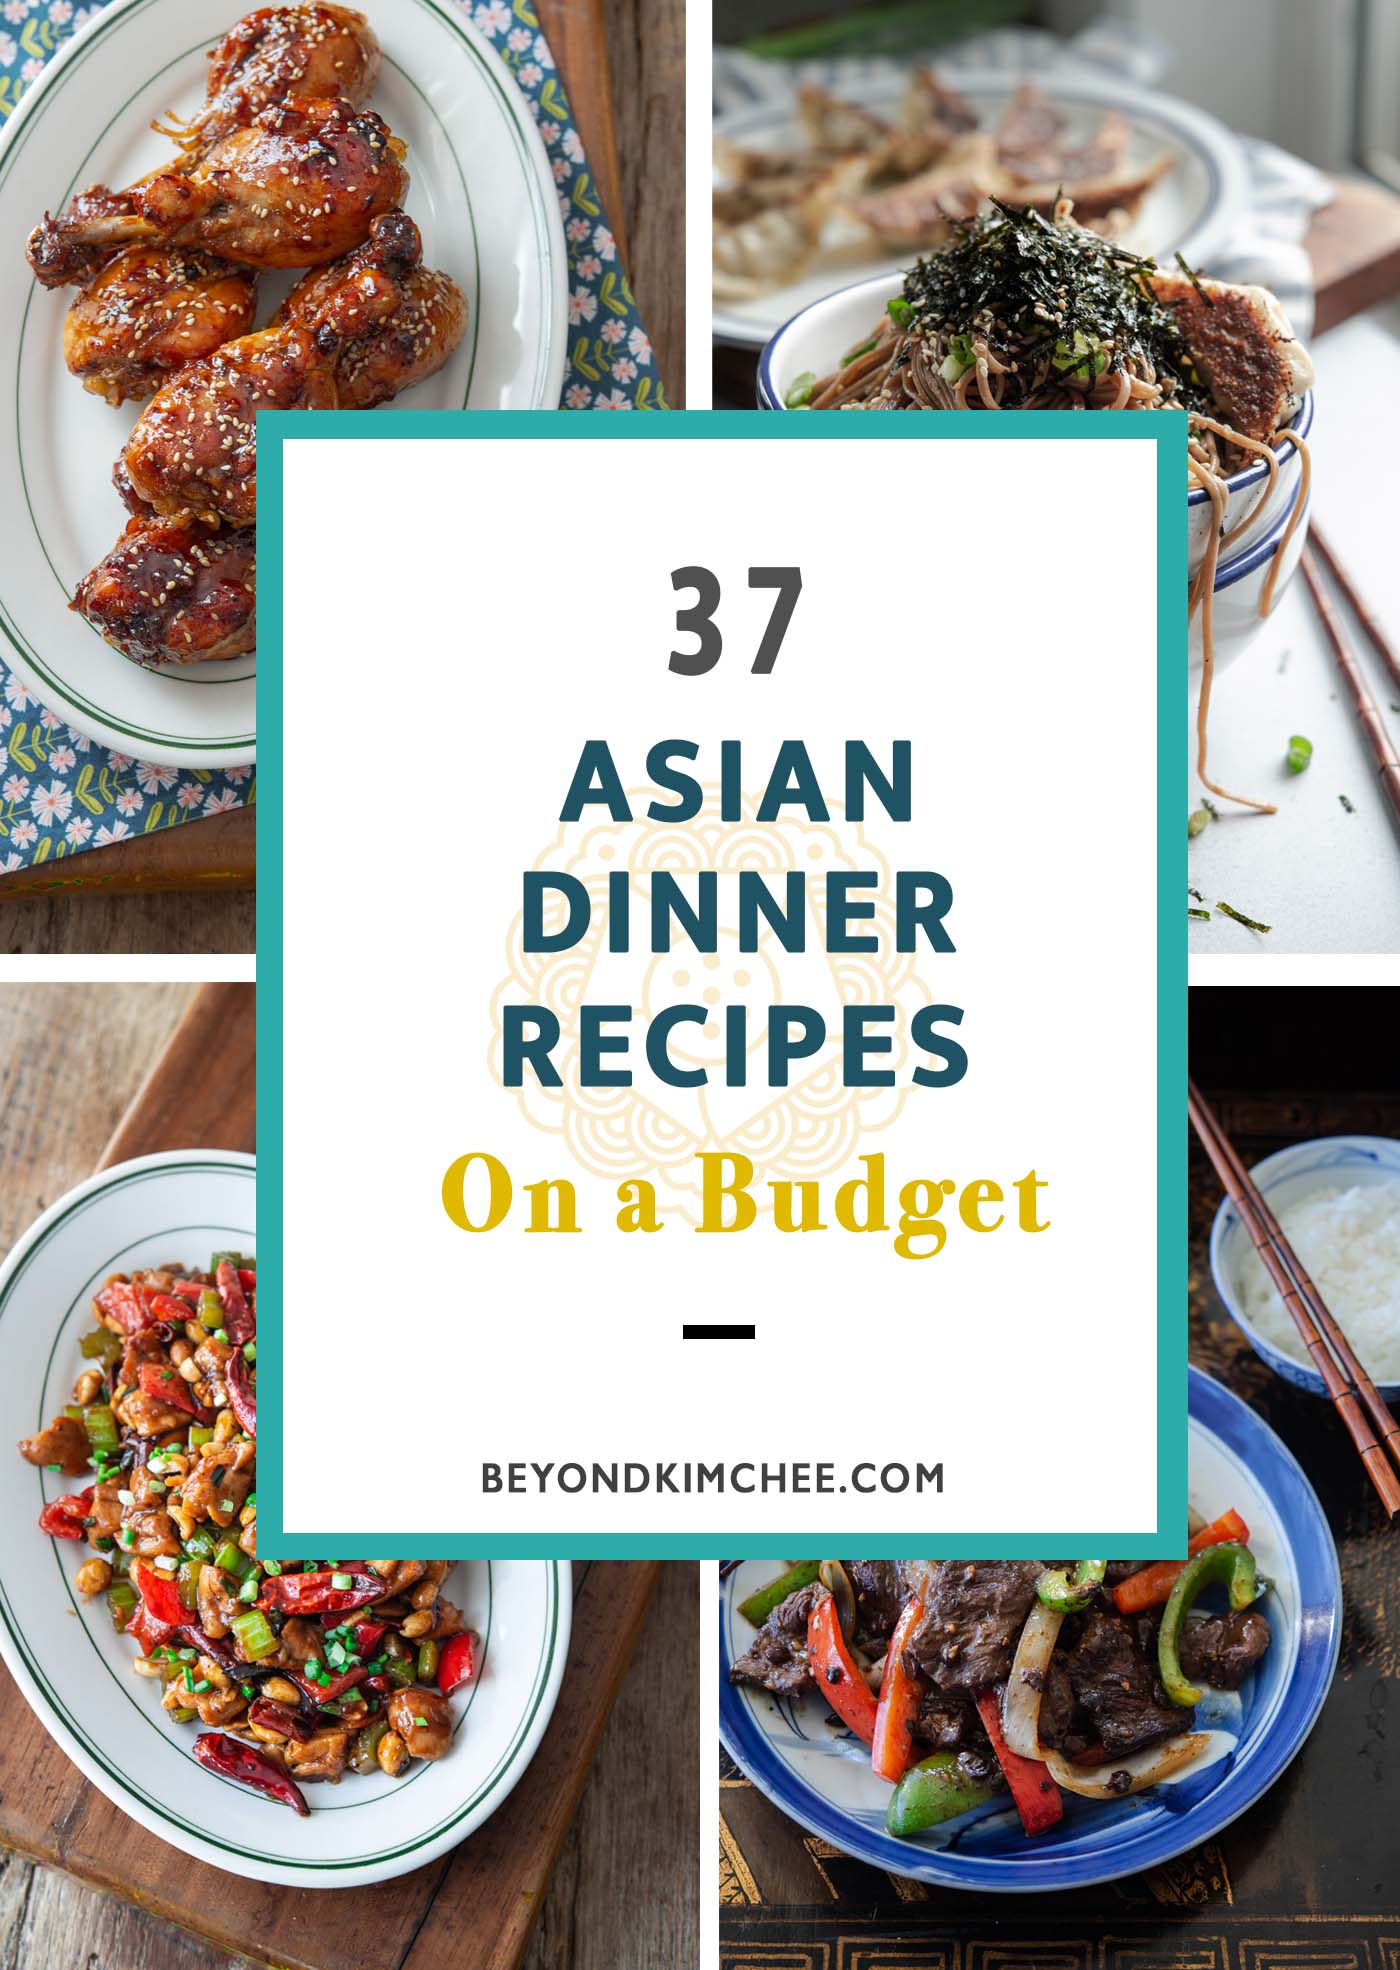 Budget-friendly ethnic dishes